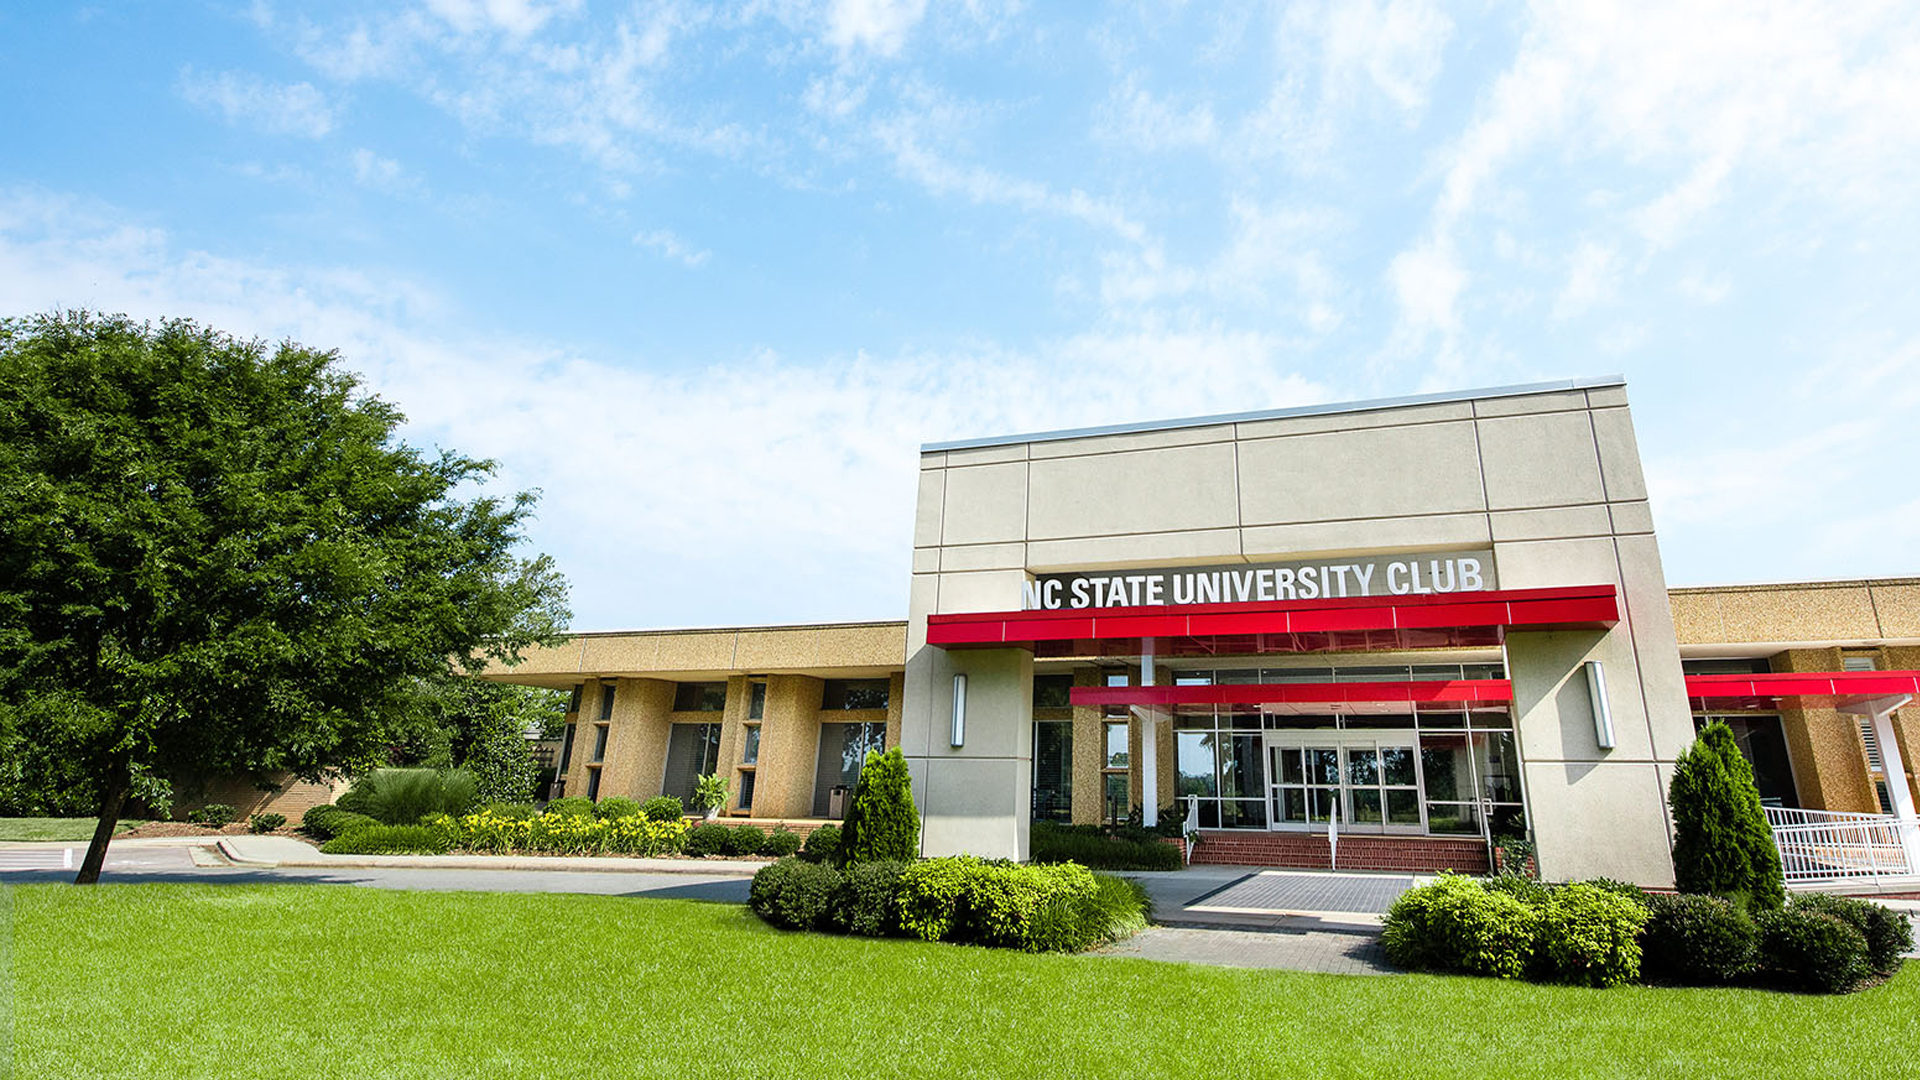 The exterior of the NC State University Club.